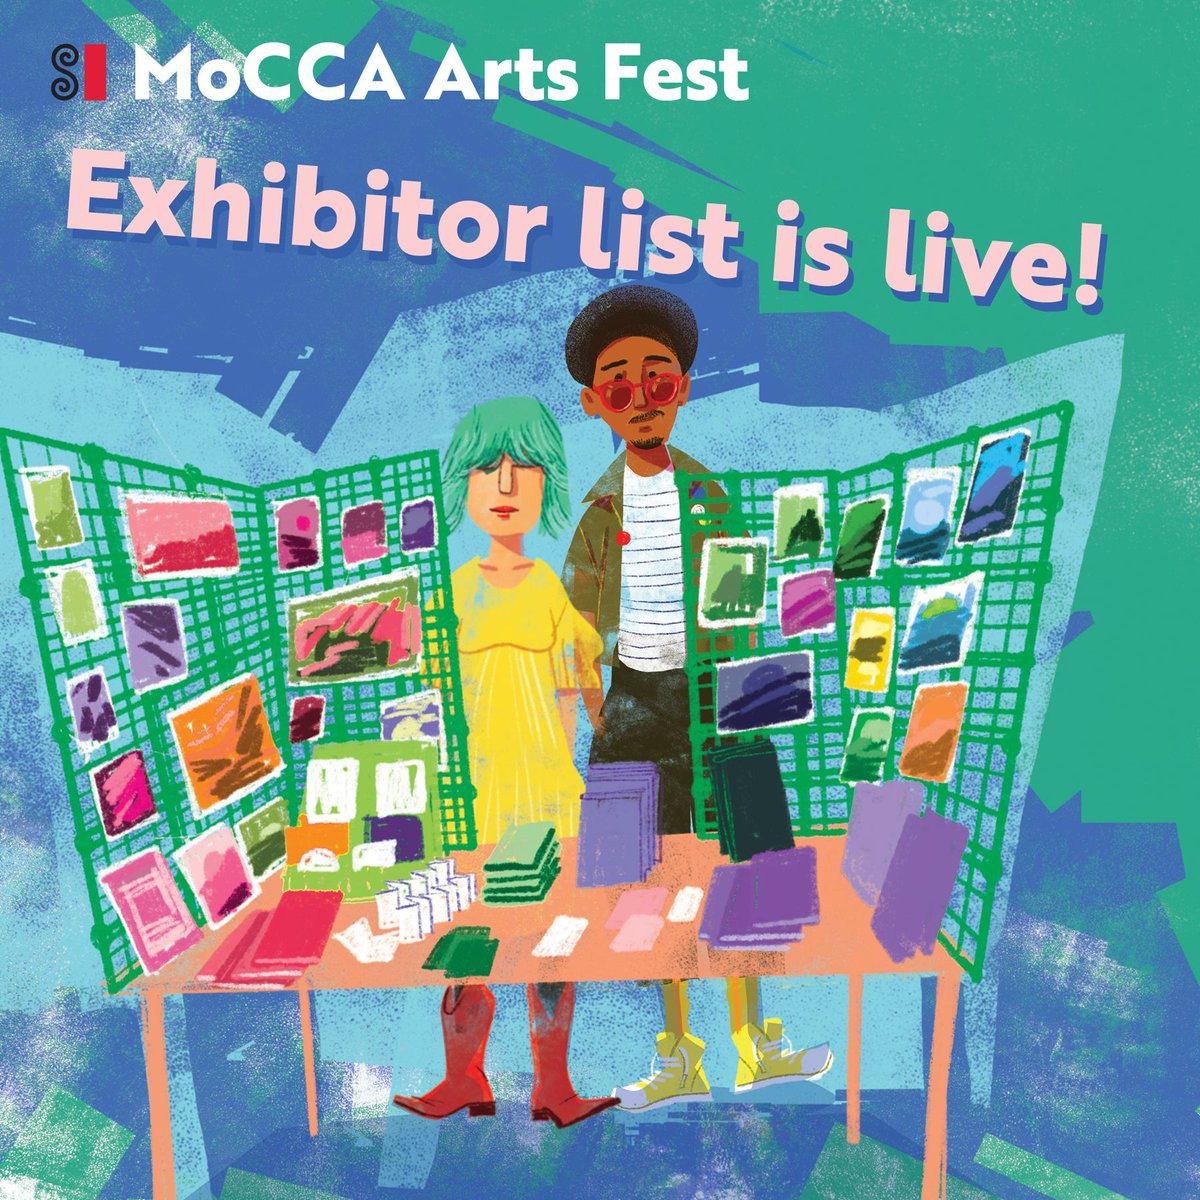 SI MoCCA Arts Festival exhibitor list is now live! Check out the full list of exhibitors here: bit.ly/3V2H5rw